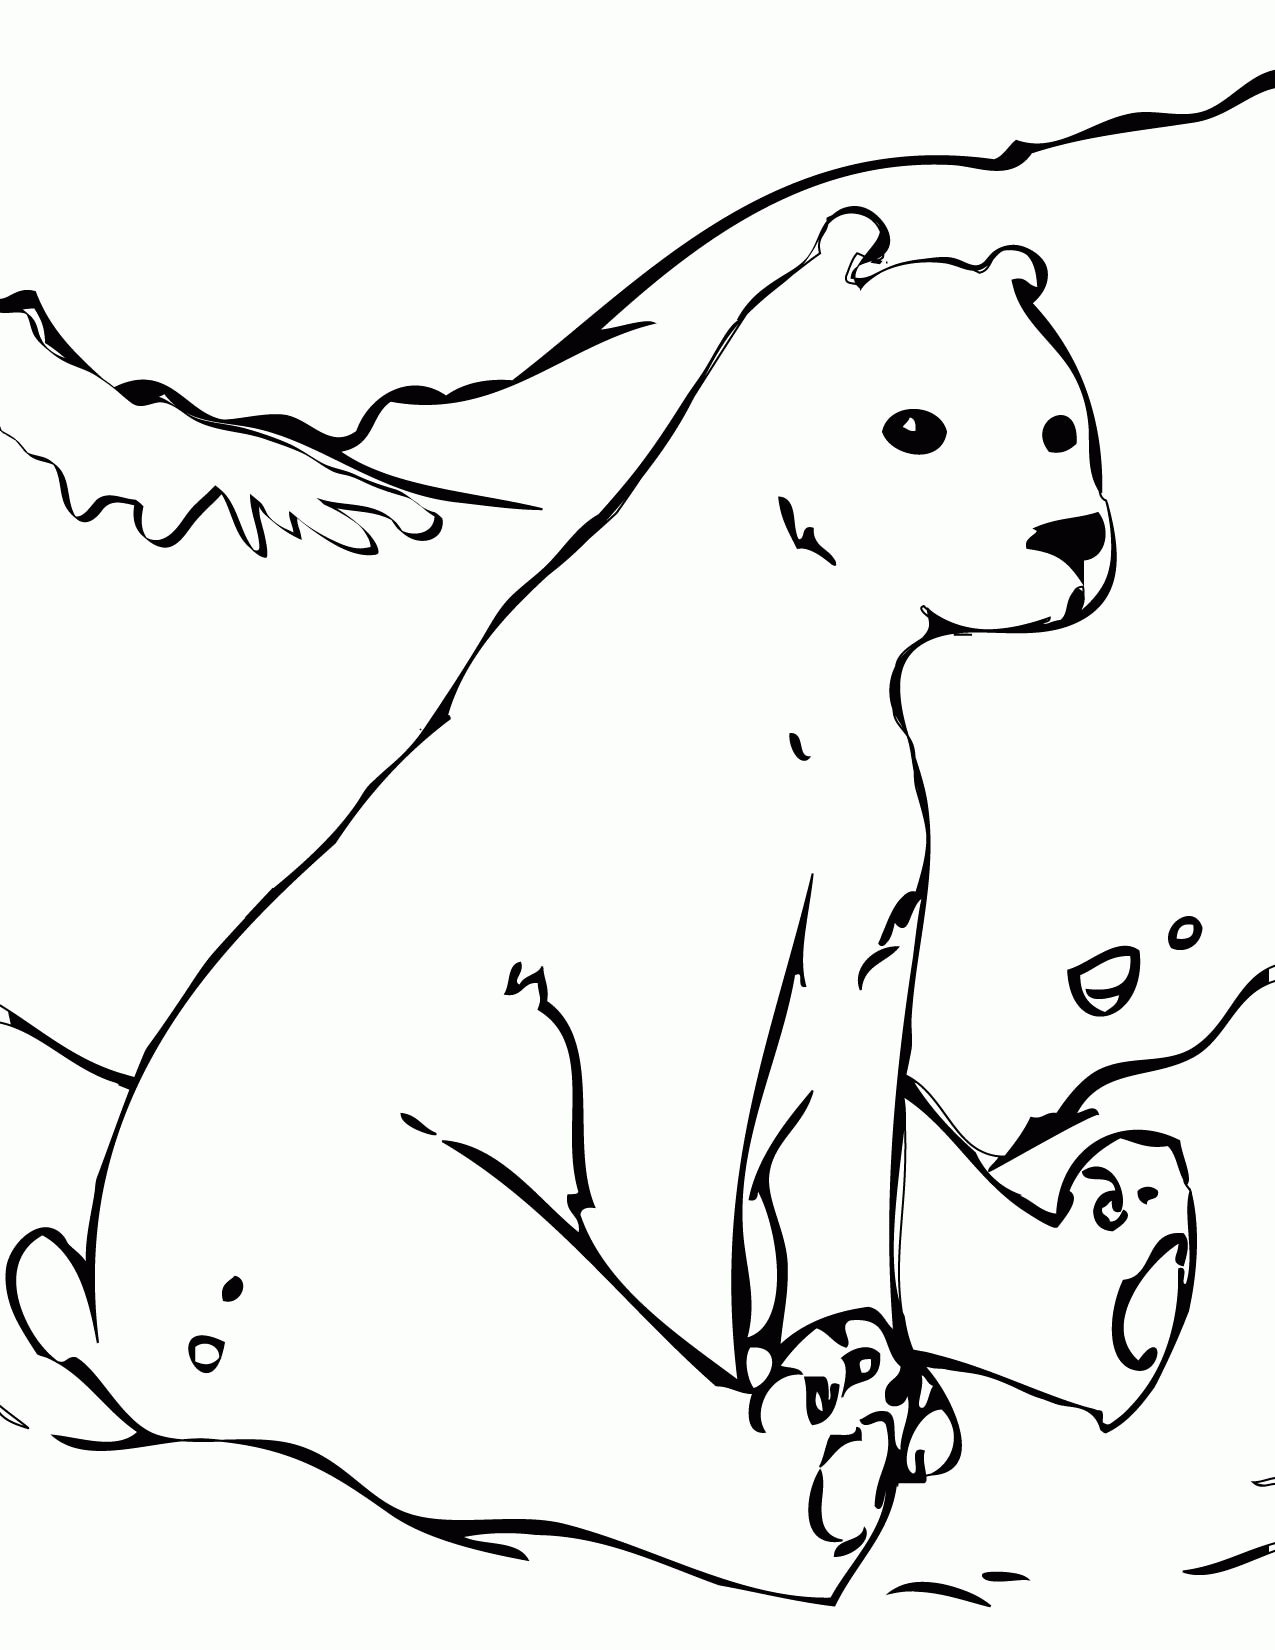 arctic tundra biome drawing - Clip Art Library